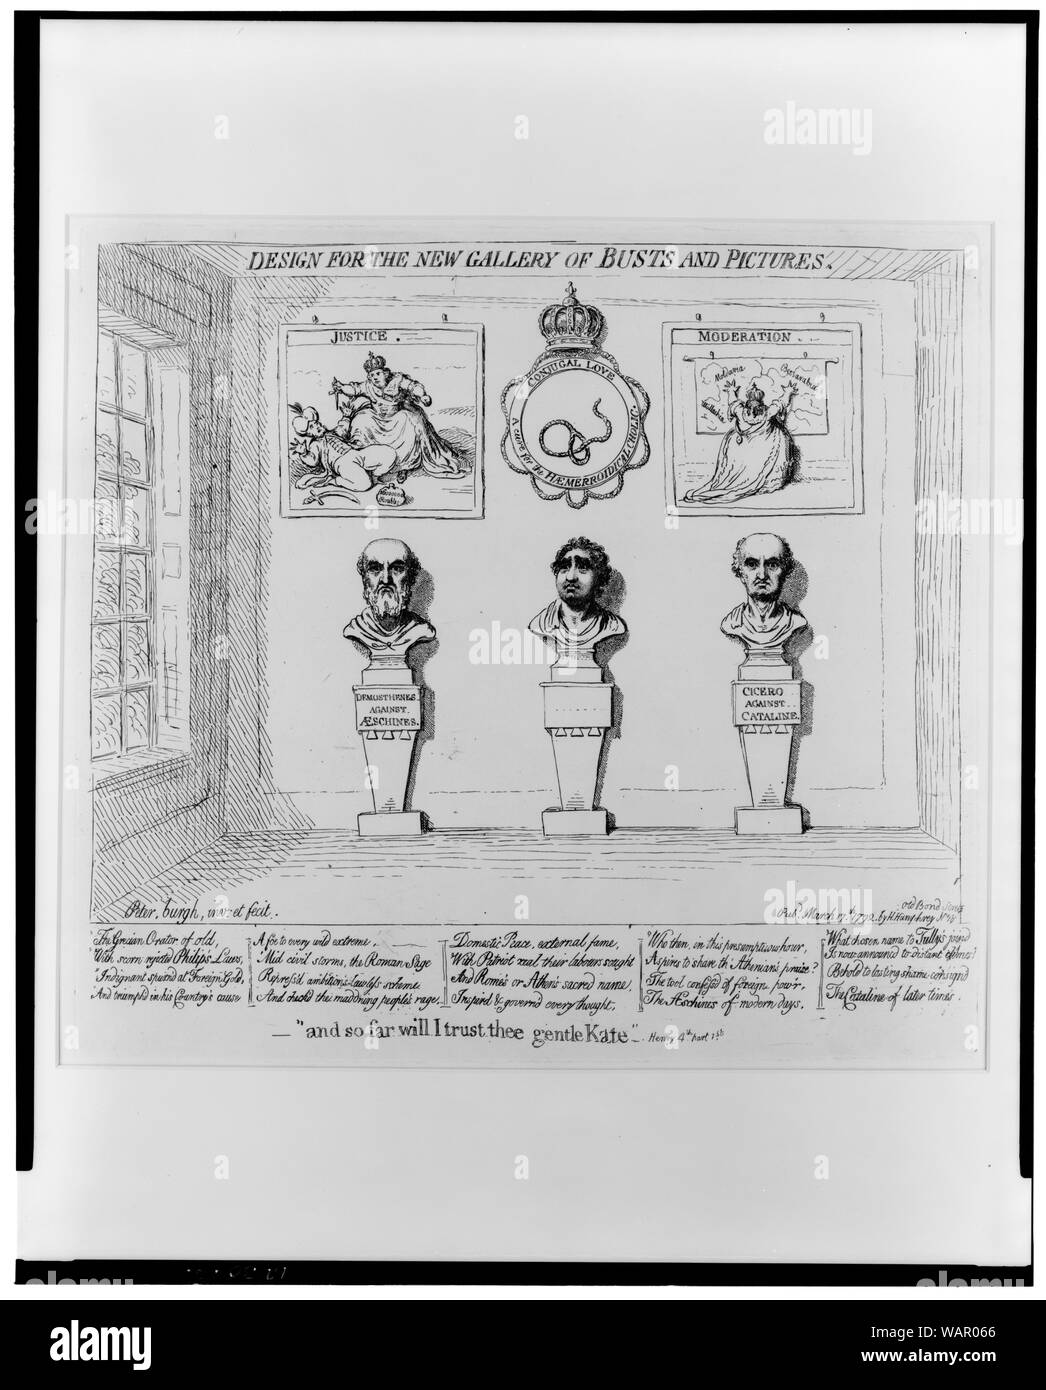 Design for the new gallery of busts and pictures Abstract: Cartoon shows interior view of a portrait gallery with busts of Demosthenes and Cicero, both frowning, and between them a bust of Charles J. Fox; hanging on the wall above are two prints showing Catherine II of Russia, in one, titled Justice, she is about to stab a sultan, in the other, Moderation, she is facing a map of Moldavia, Bessarabia, and Wallachia, which she embraces with outspread arms; hanging above the bust of Fox is a crowned circle inscribed Conjugal love [-] A cure for the Haemerroidical Cholic within which is a rope noo Stock Photo